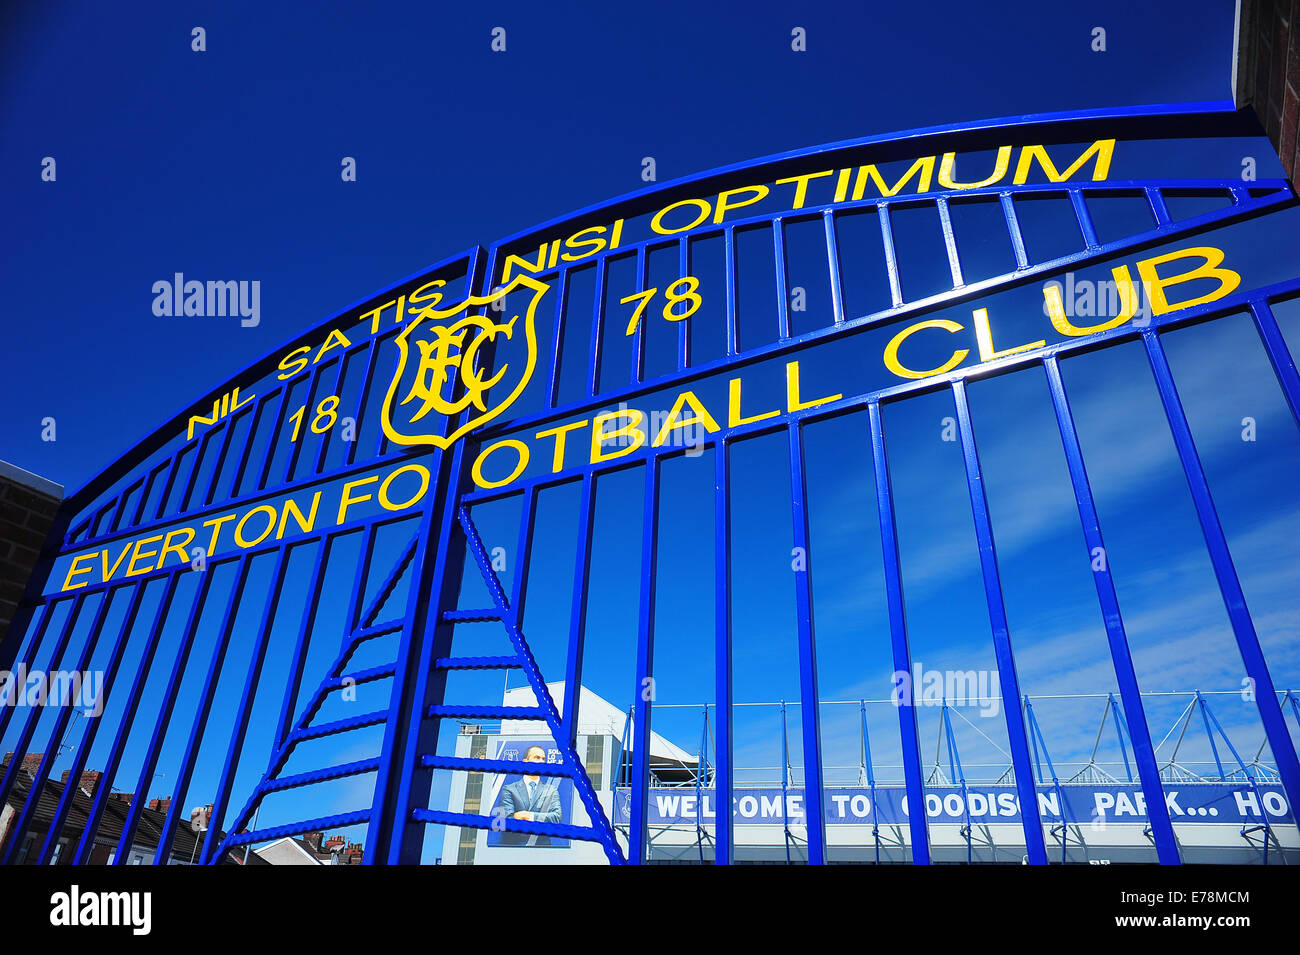 Everton Football Club's new gates featuring the club motto and crest with the date the club was formed. Stock Photo